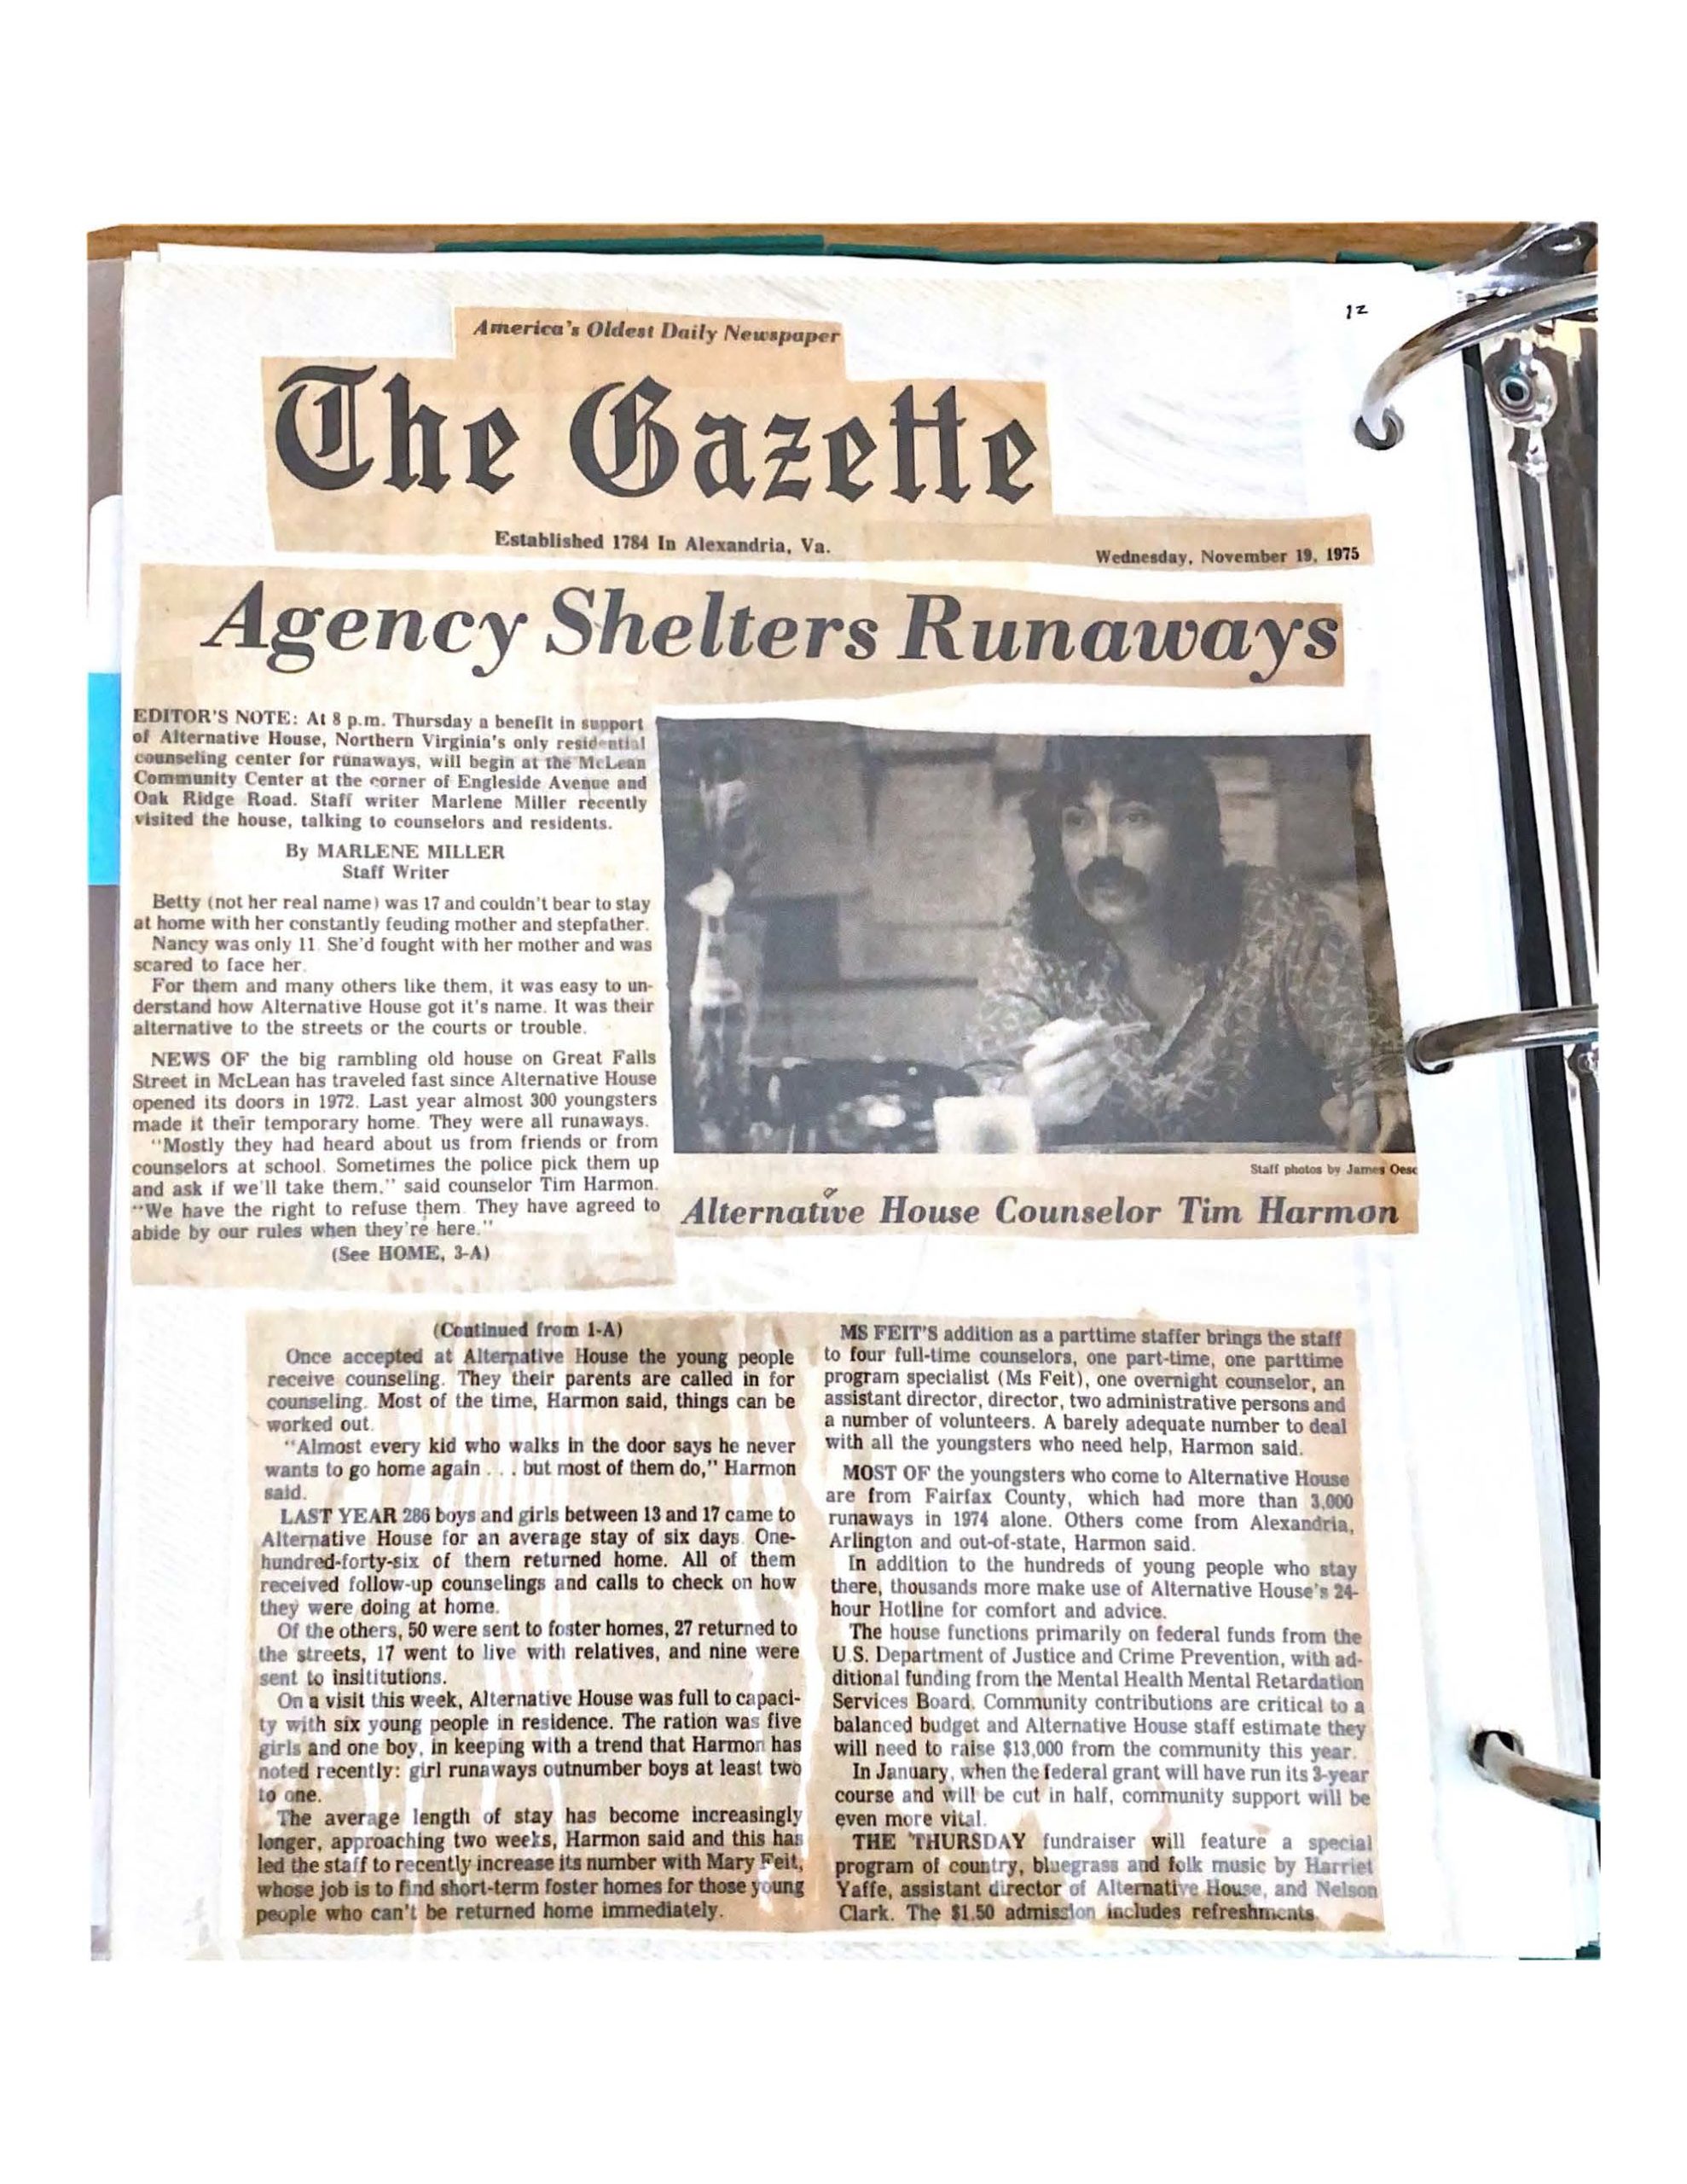 1975 Agency Shelters Runaways in The Gazette_Page_1